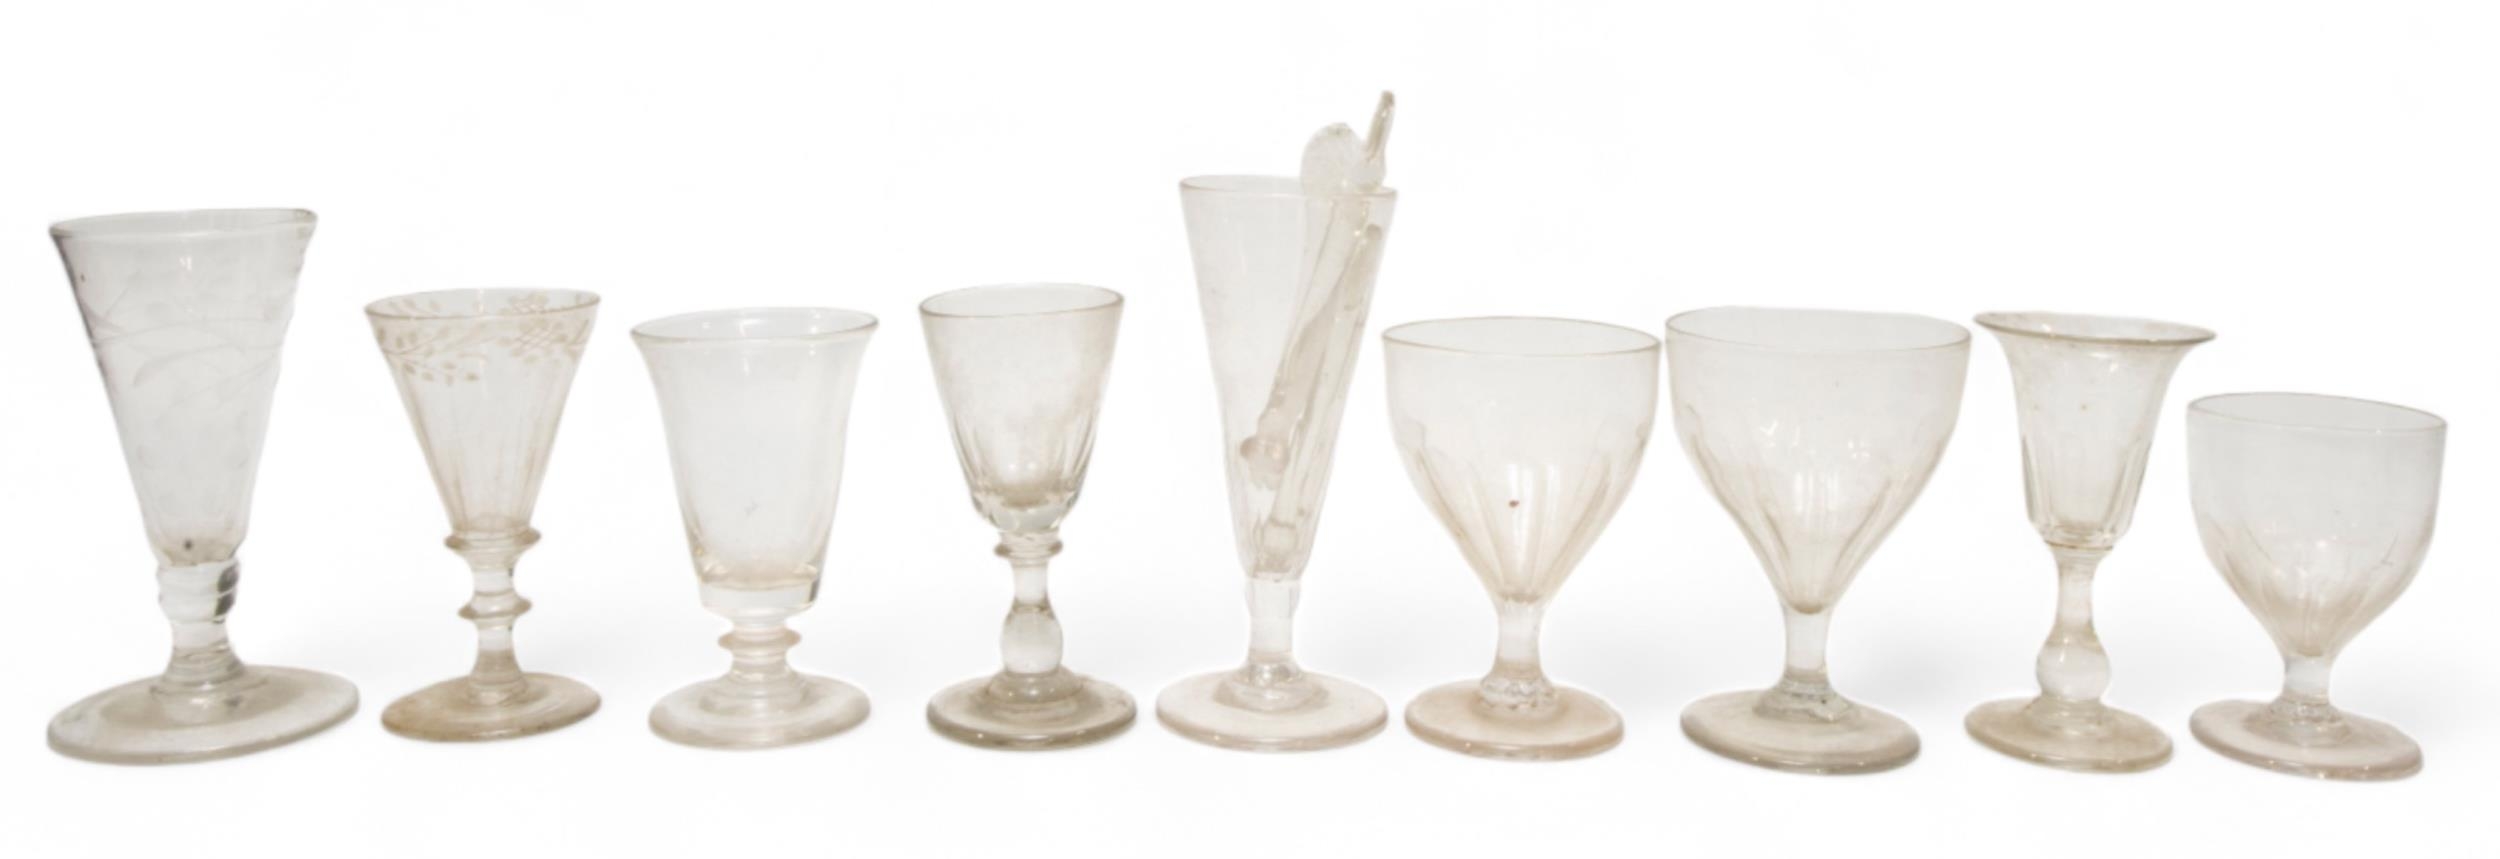 A MIXED GROUP OF GLASS WARE, PREDOMINANTLY 18TH/19TH CENTURY, the lot includes a conch form vase, - Image 5 of 6